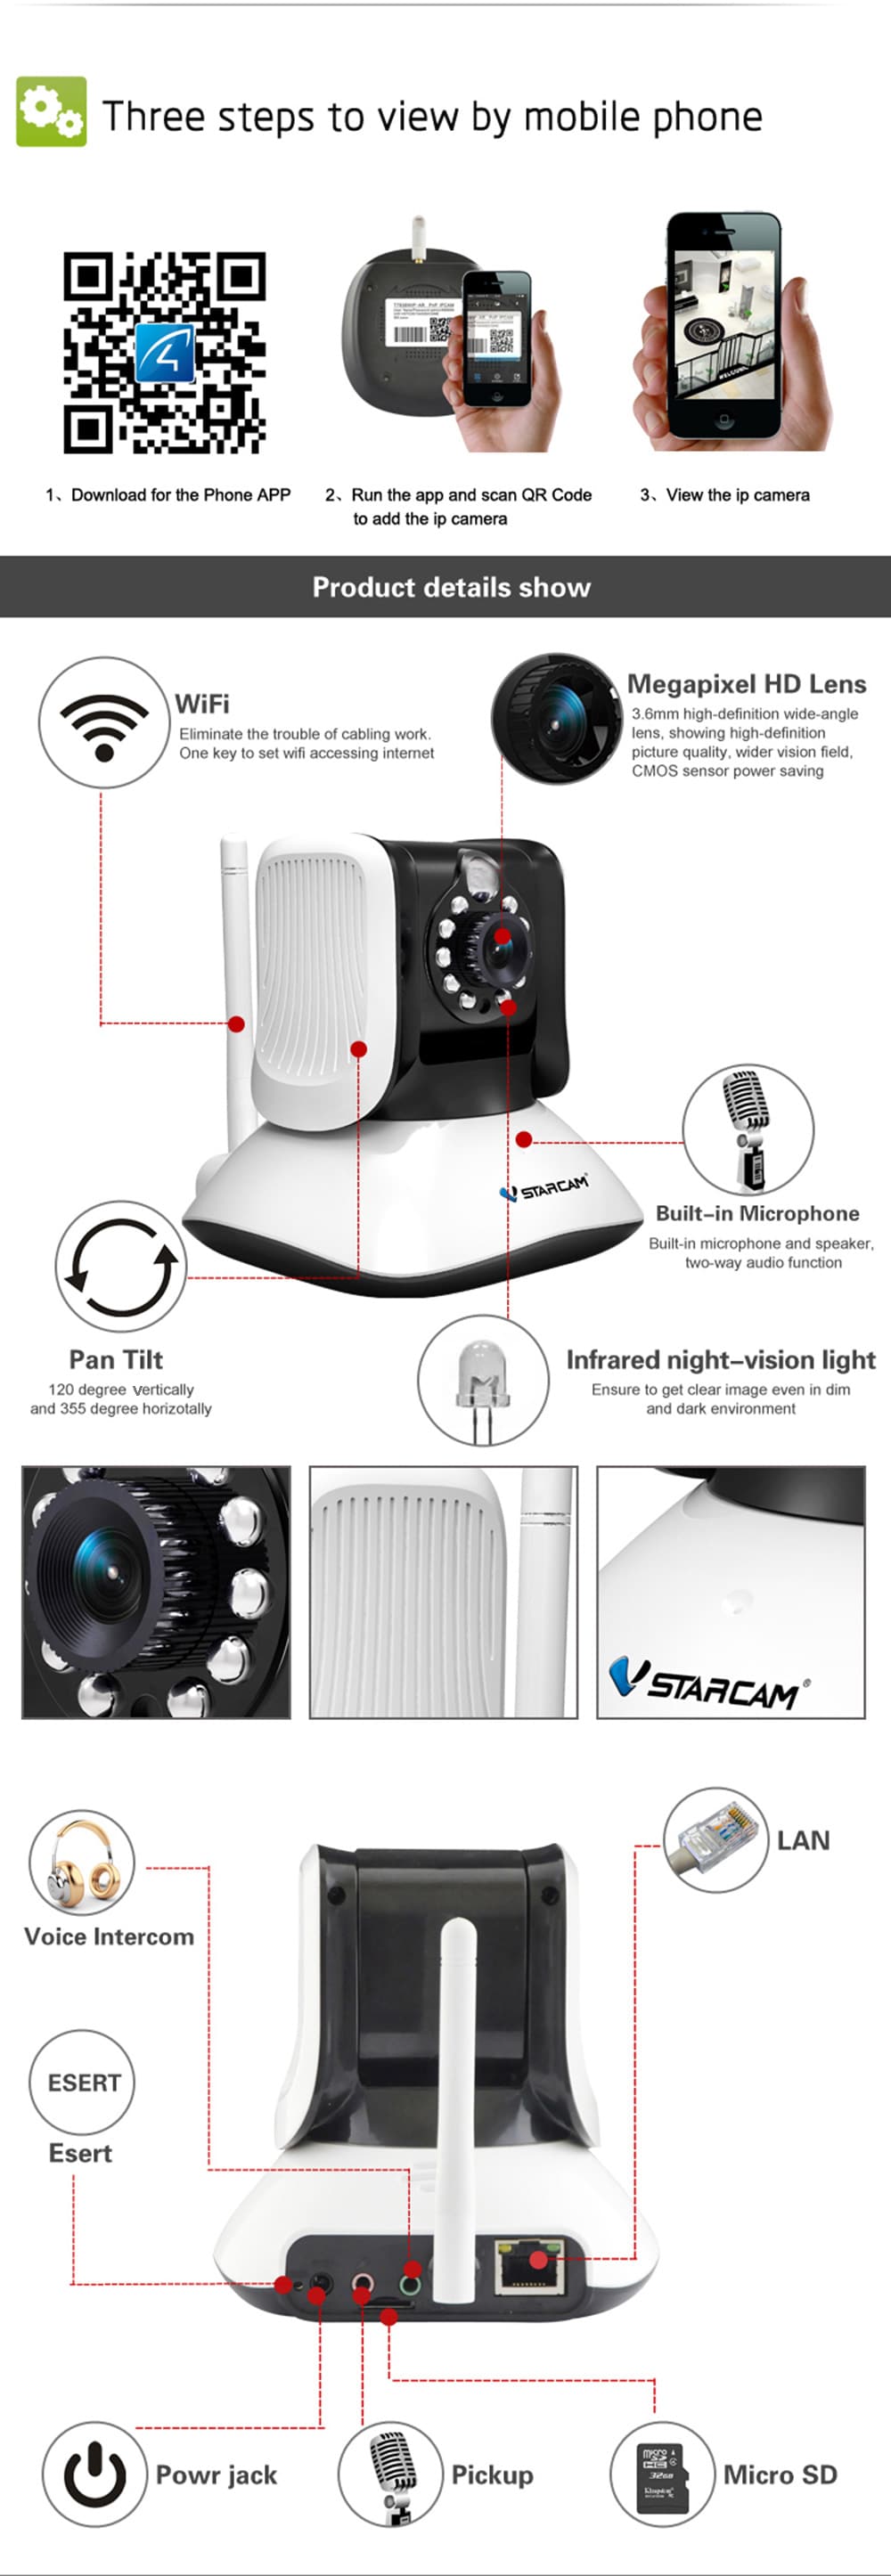 Vstarcam T7821WIP 1.0MP IP Network Camera for Home Safety- White US Plug